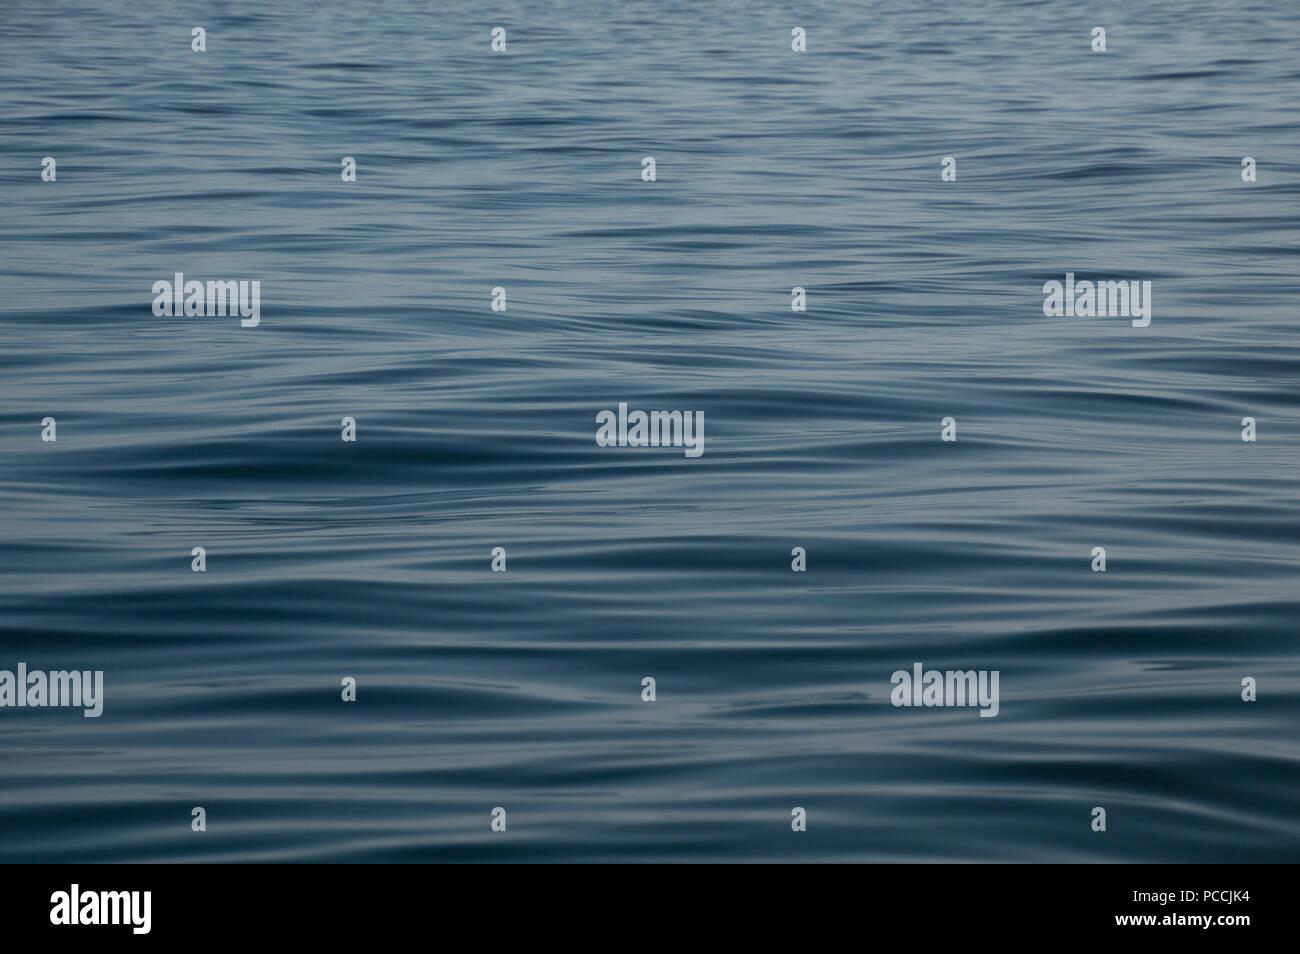 Closeup deep blue water with ripples background wallpaper Stock Photo